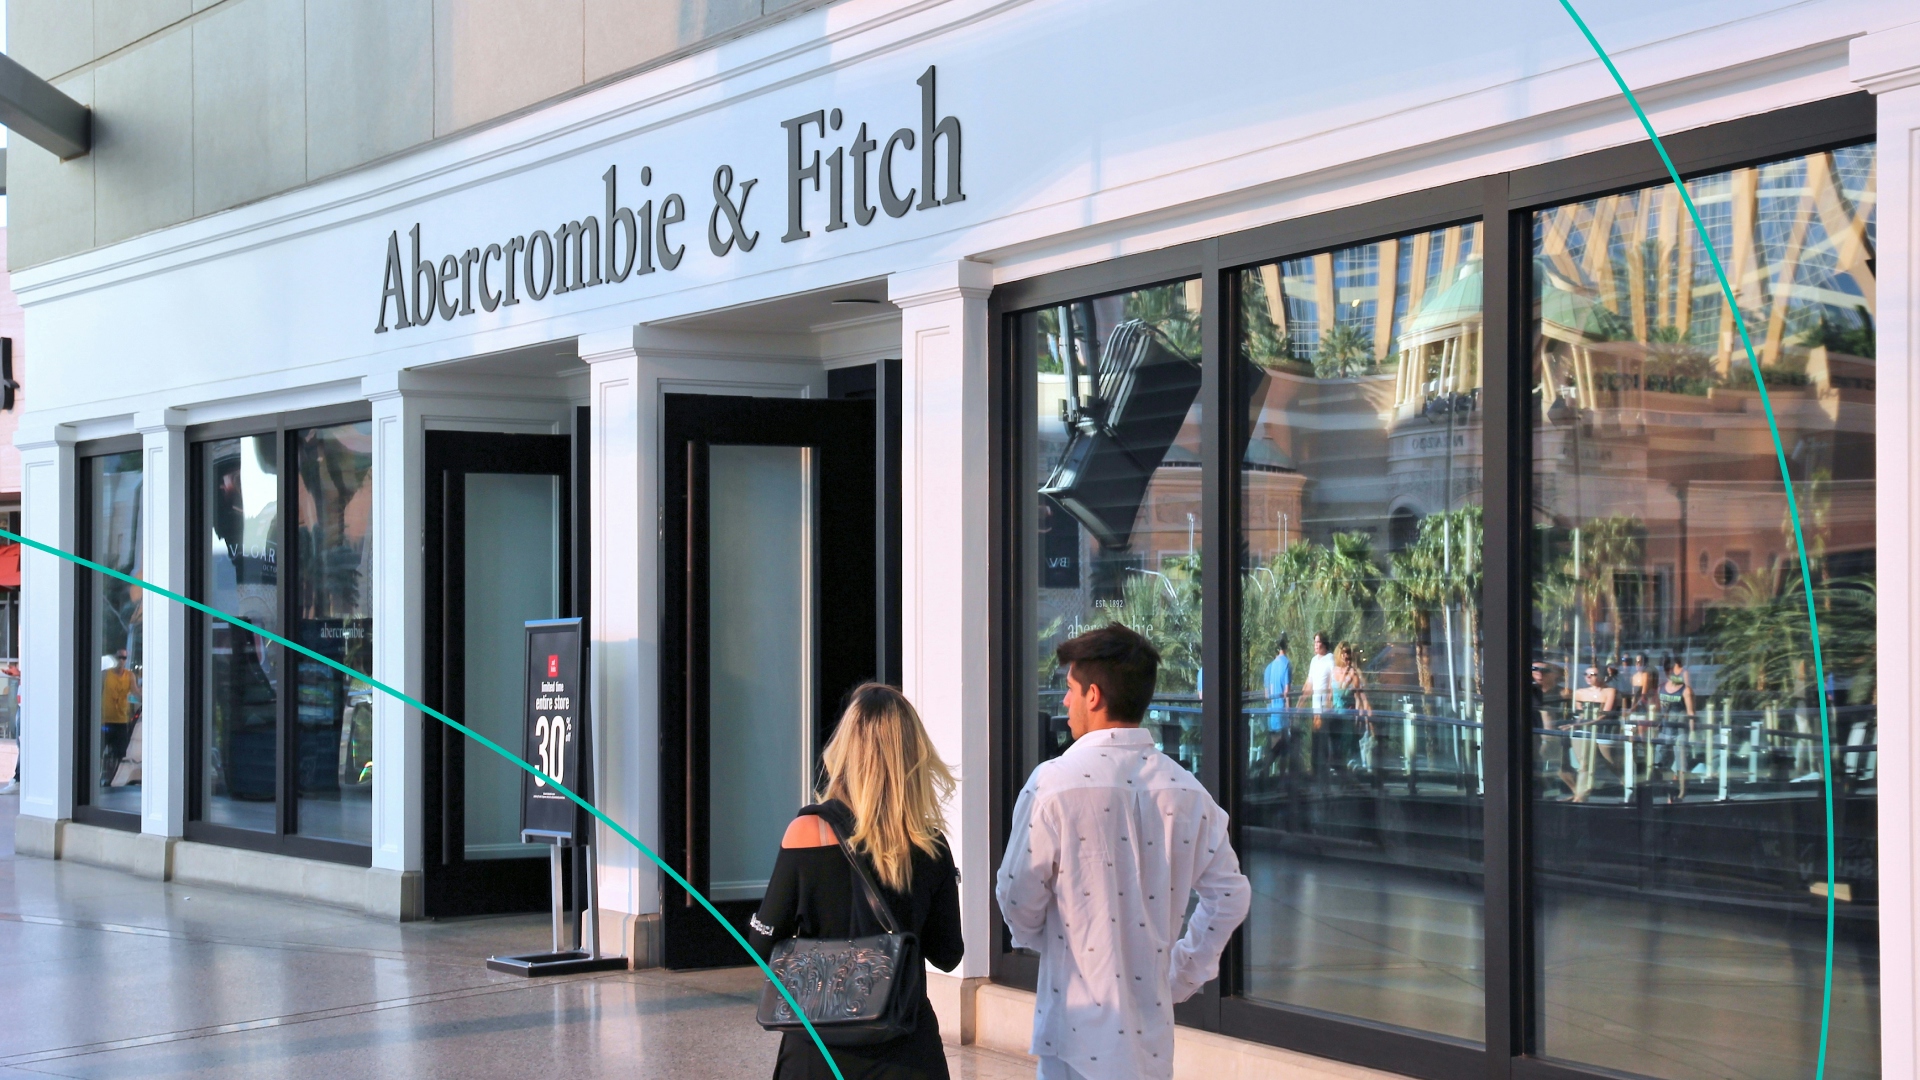 Two people walking in front of an Abercrombie & Fitch store front